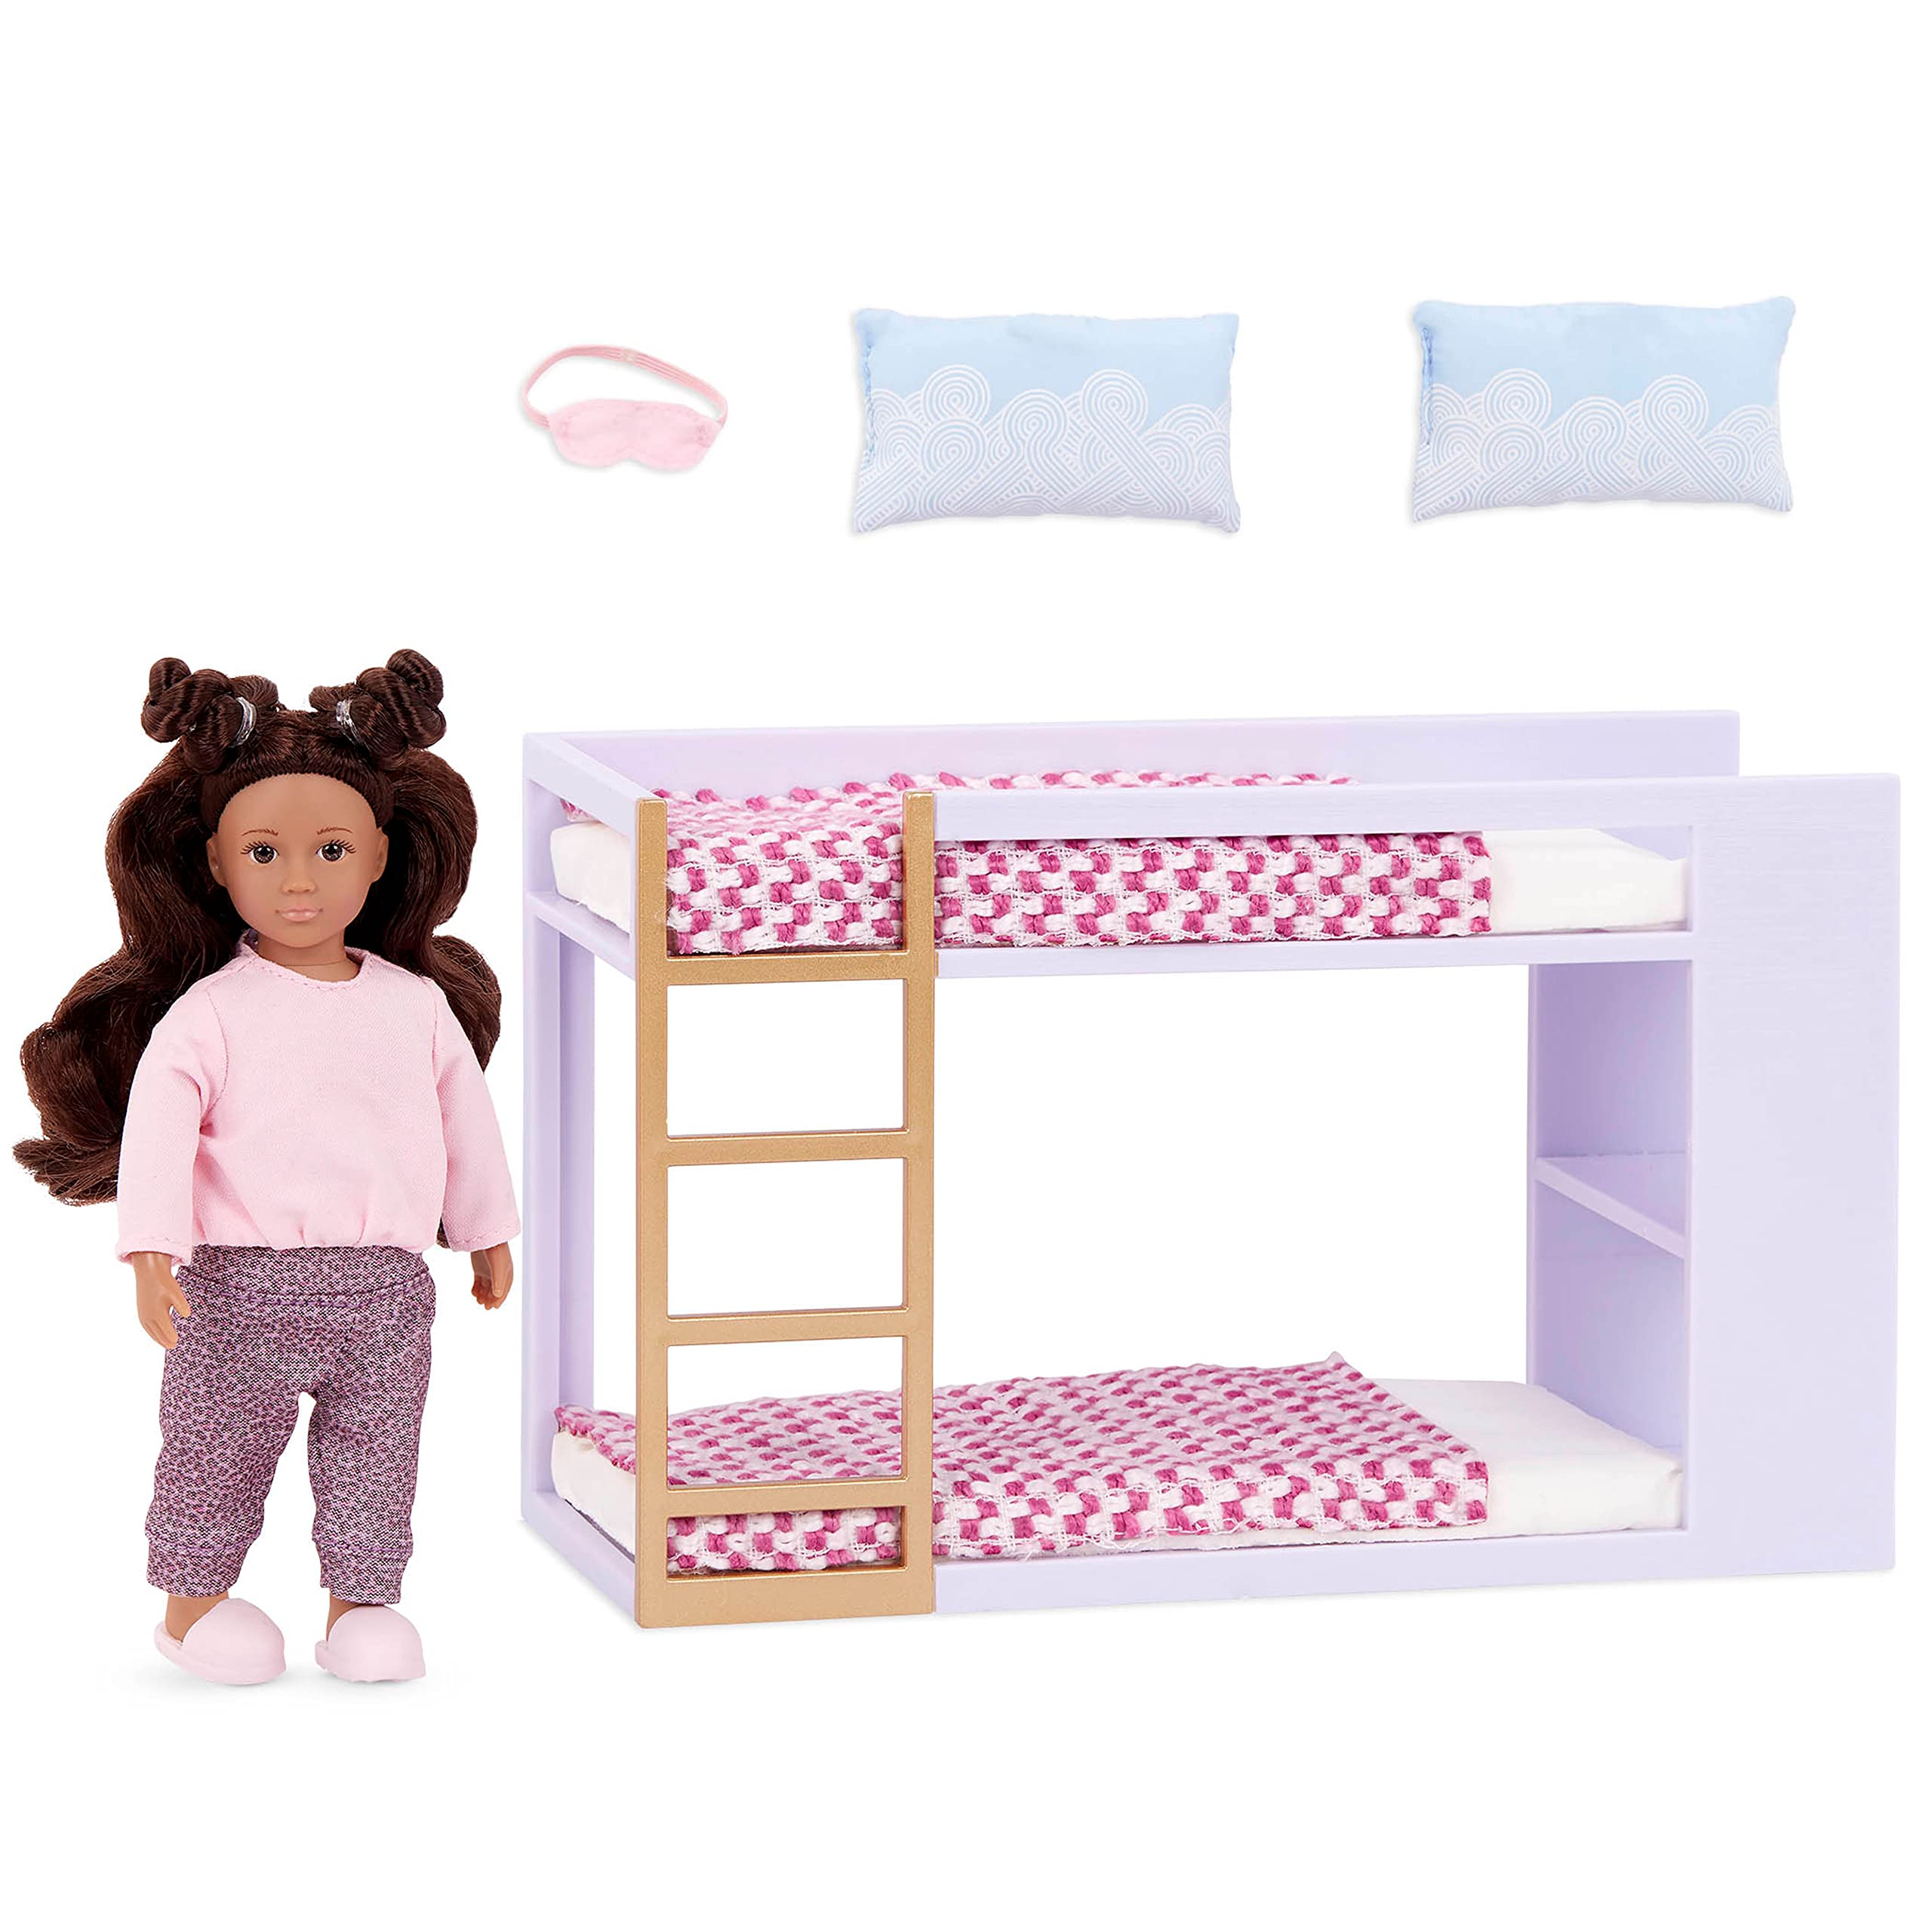 Lori Dolls – Tania’s Bunk Bed Set – Mini Doll & Toy Bunk Bed – 6-inch Doll & Bedroom Furniture – Dollhouse Accessories – Play Set for Kids – 3 Years +